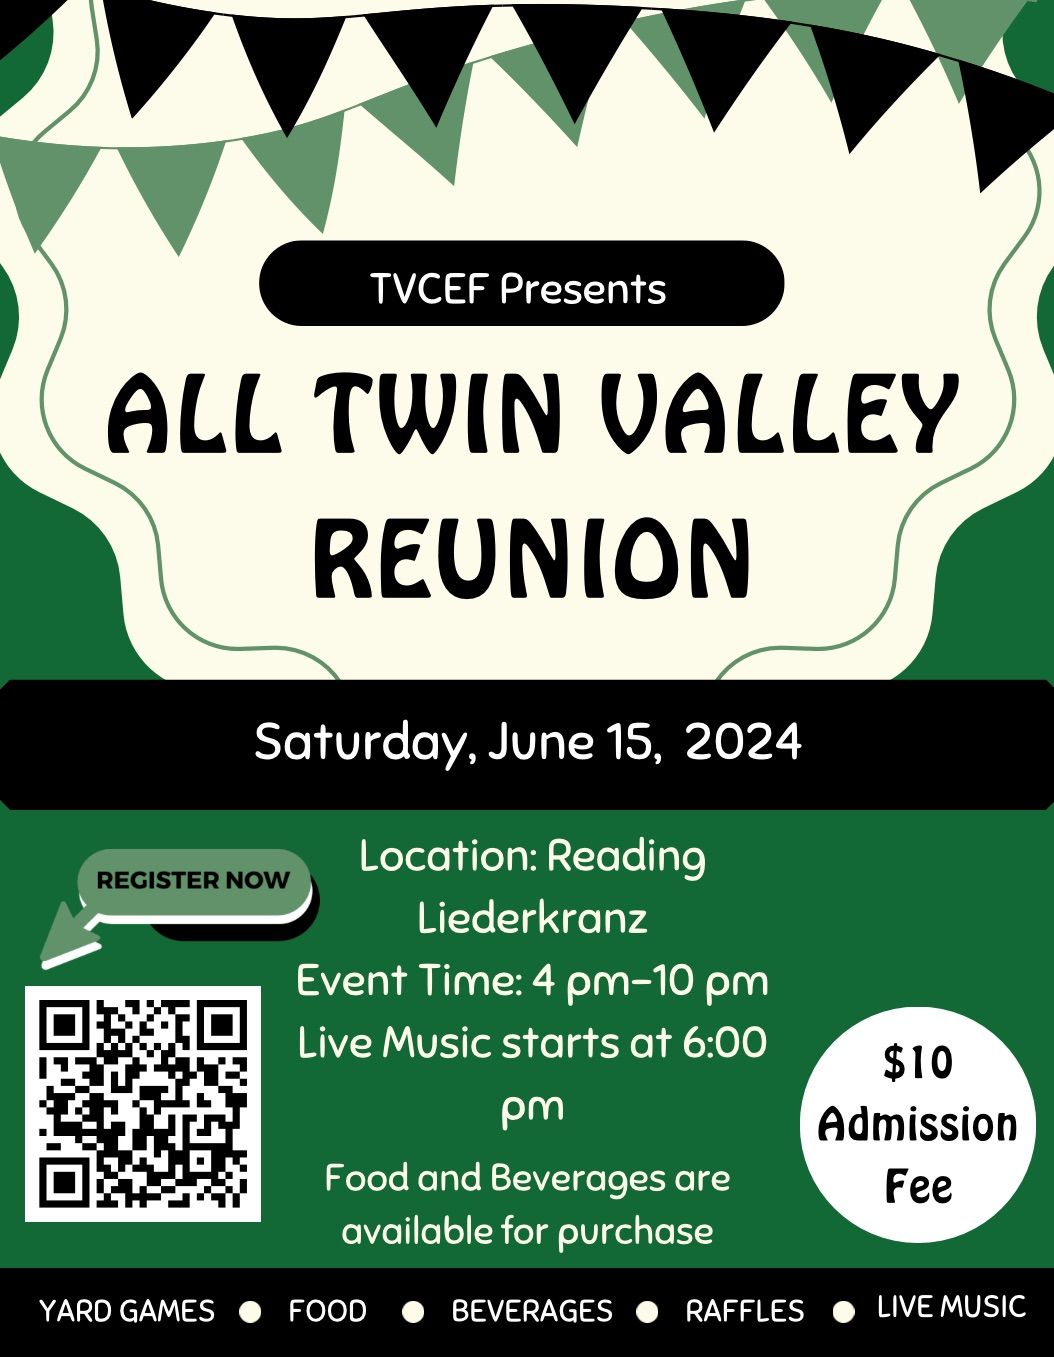 All Twin Valley Reunion 